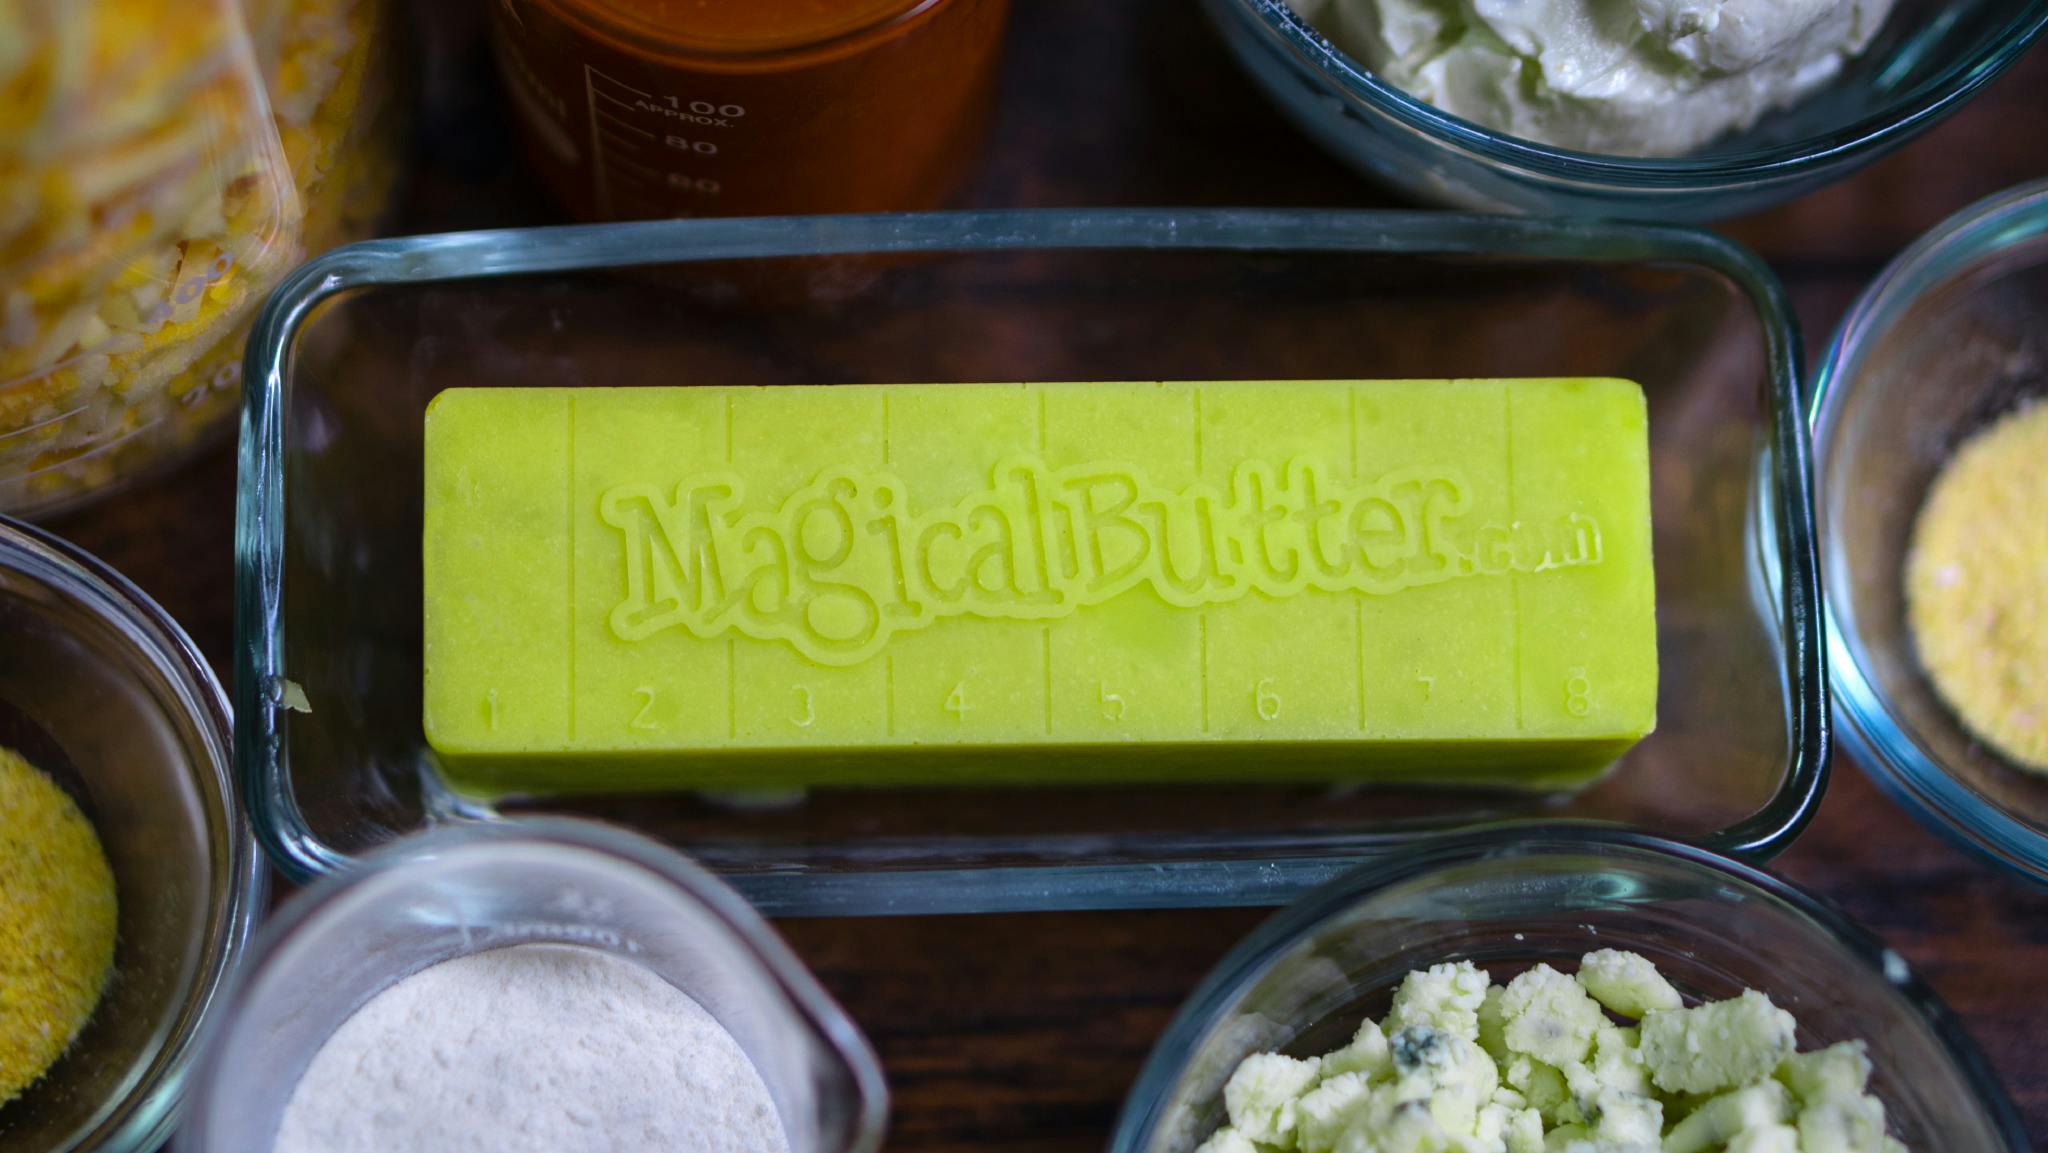 gdAvZG g 5 Reasons The MagicalButter Machine Is A Must Have When Youre Cooking With Cannabis